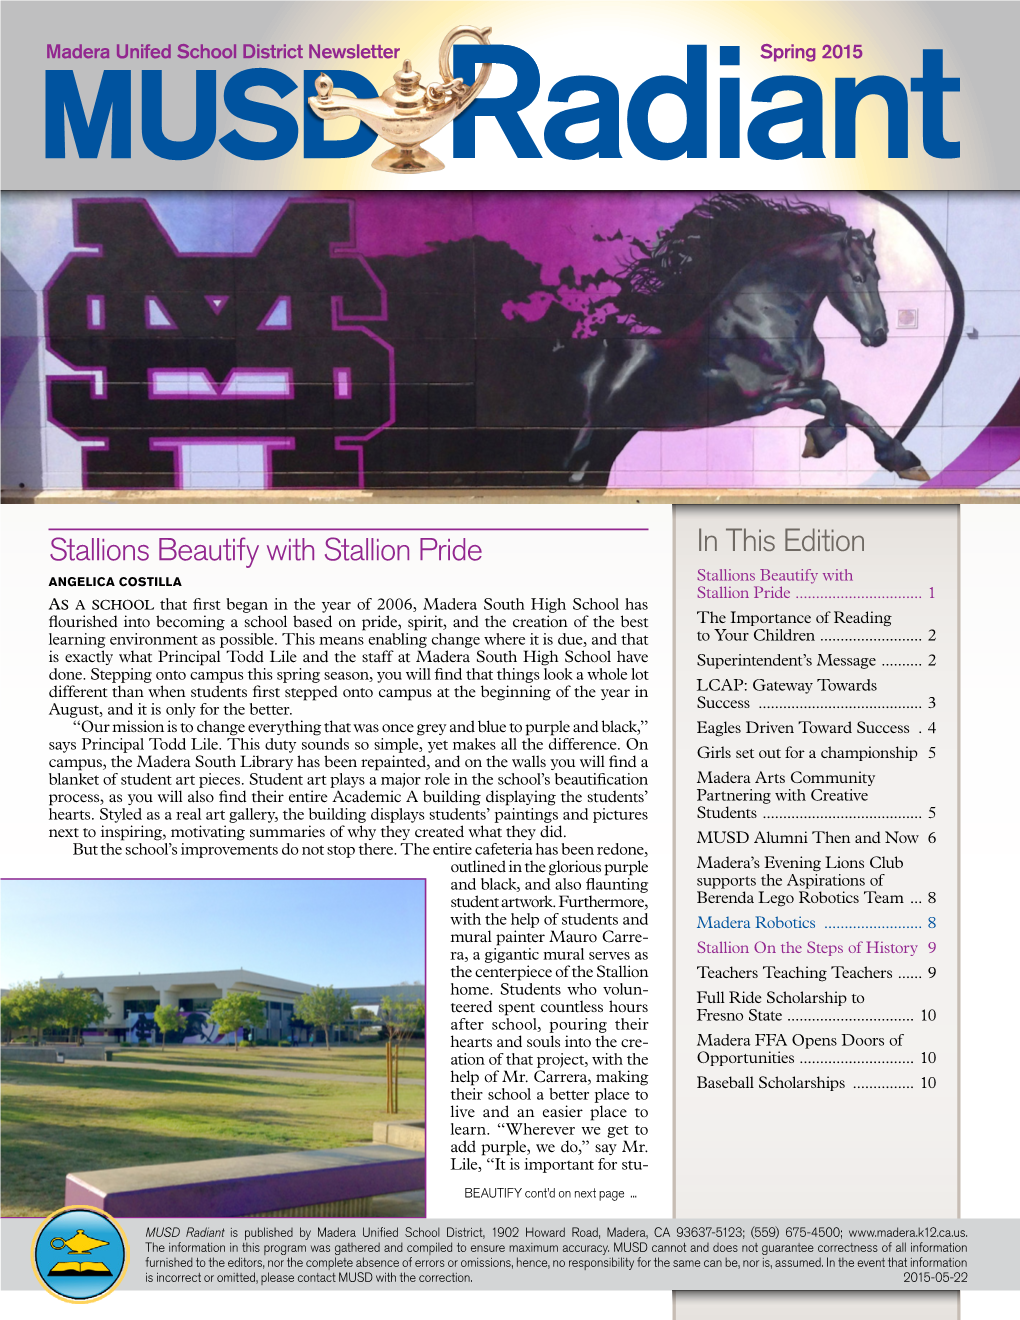 Stallions Beautify with Stallion Pride in This Edition